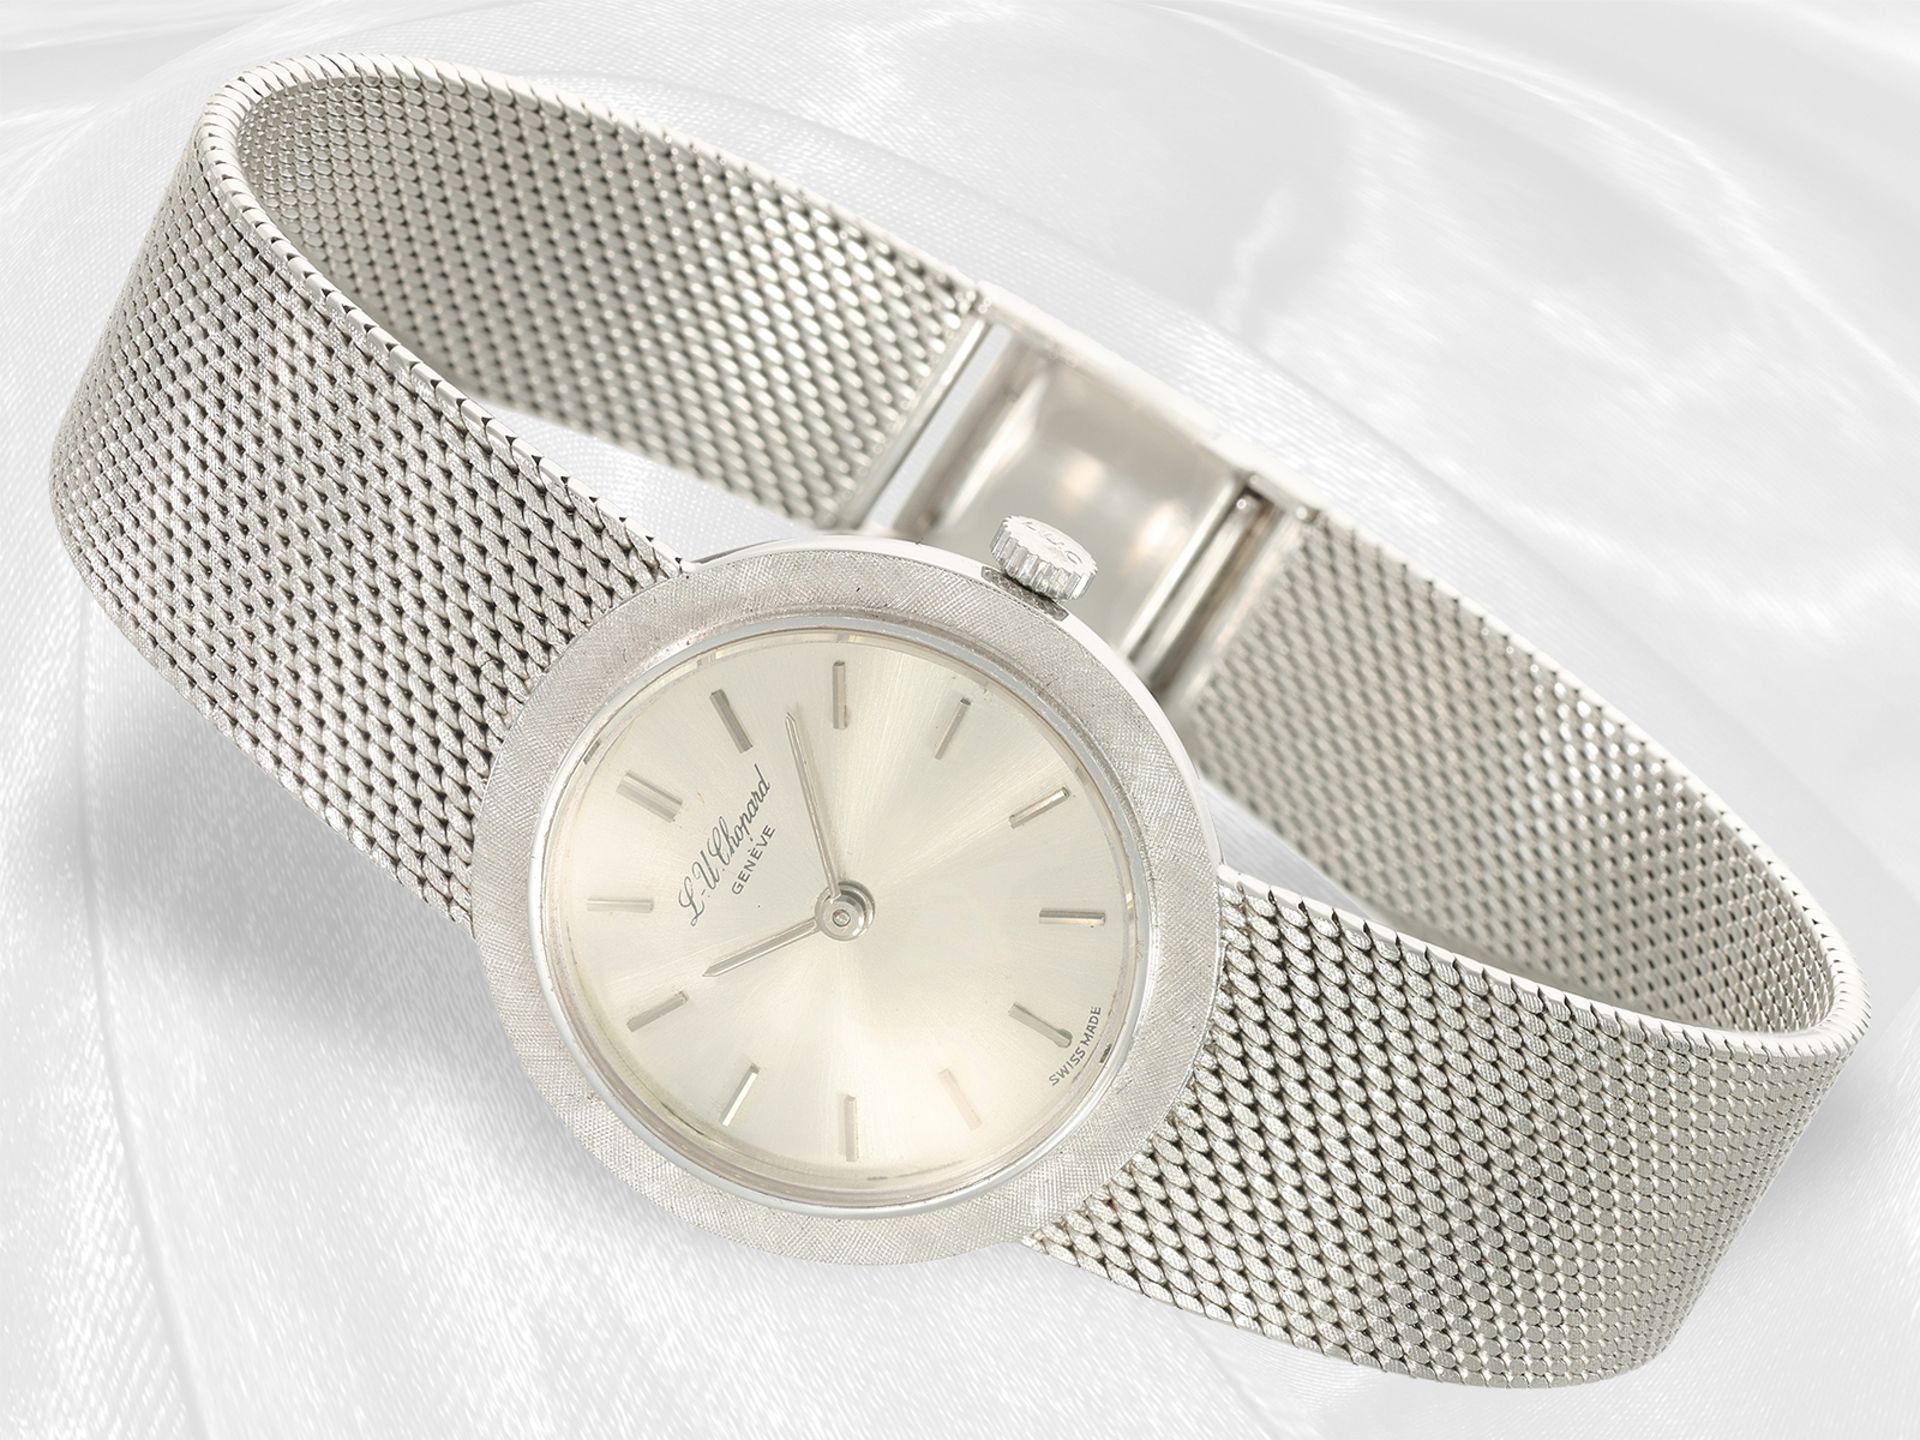 Wristwatch: fine, white gold vintage ladies' watch by Chopard, manual winding, 18K white gold - Image 4 of 5